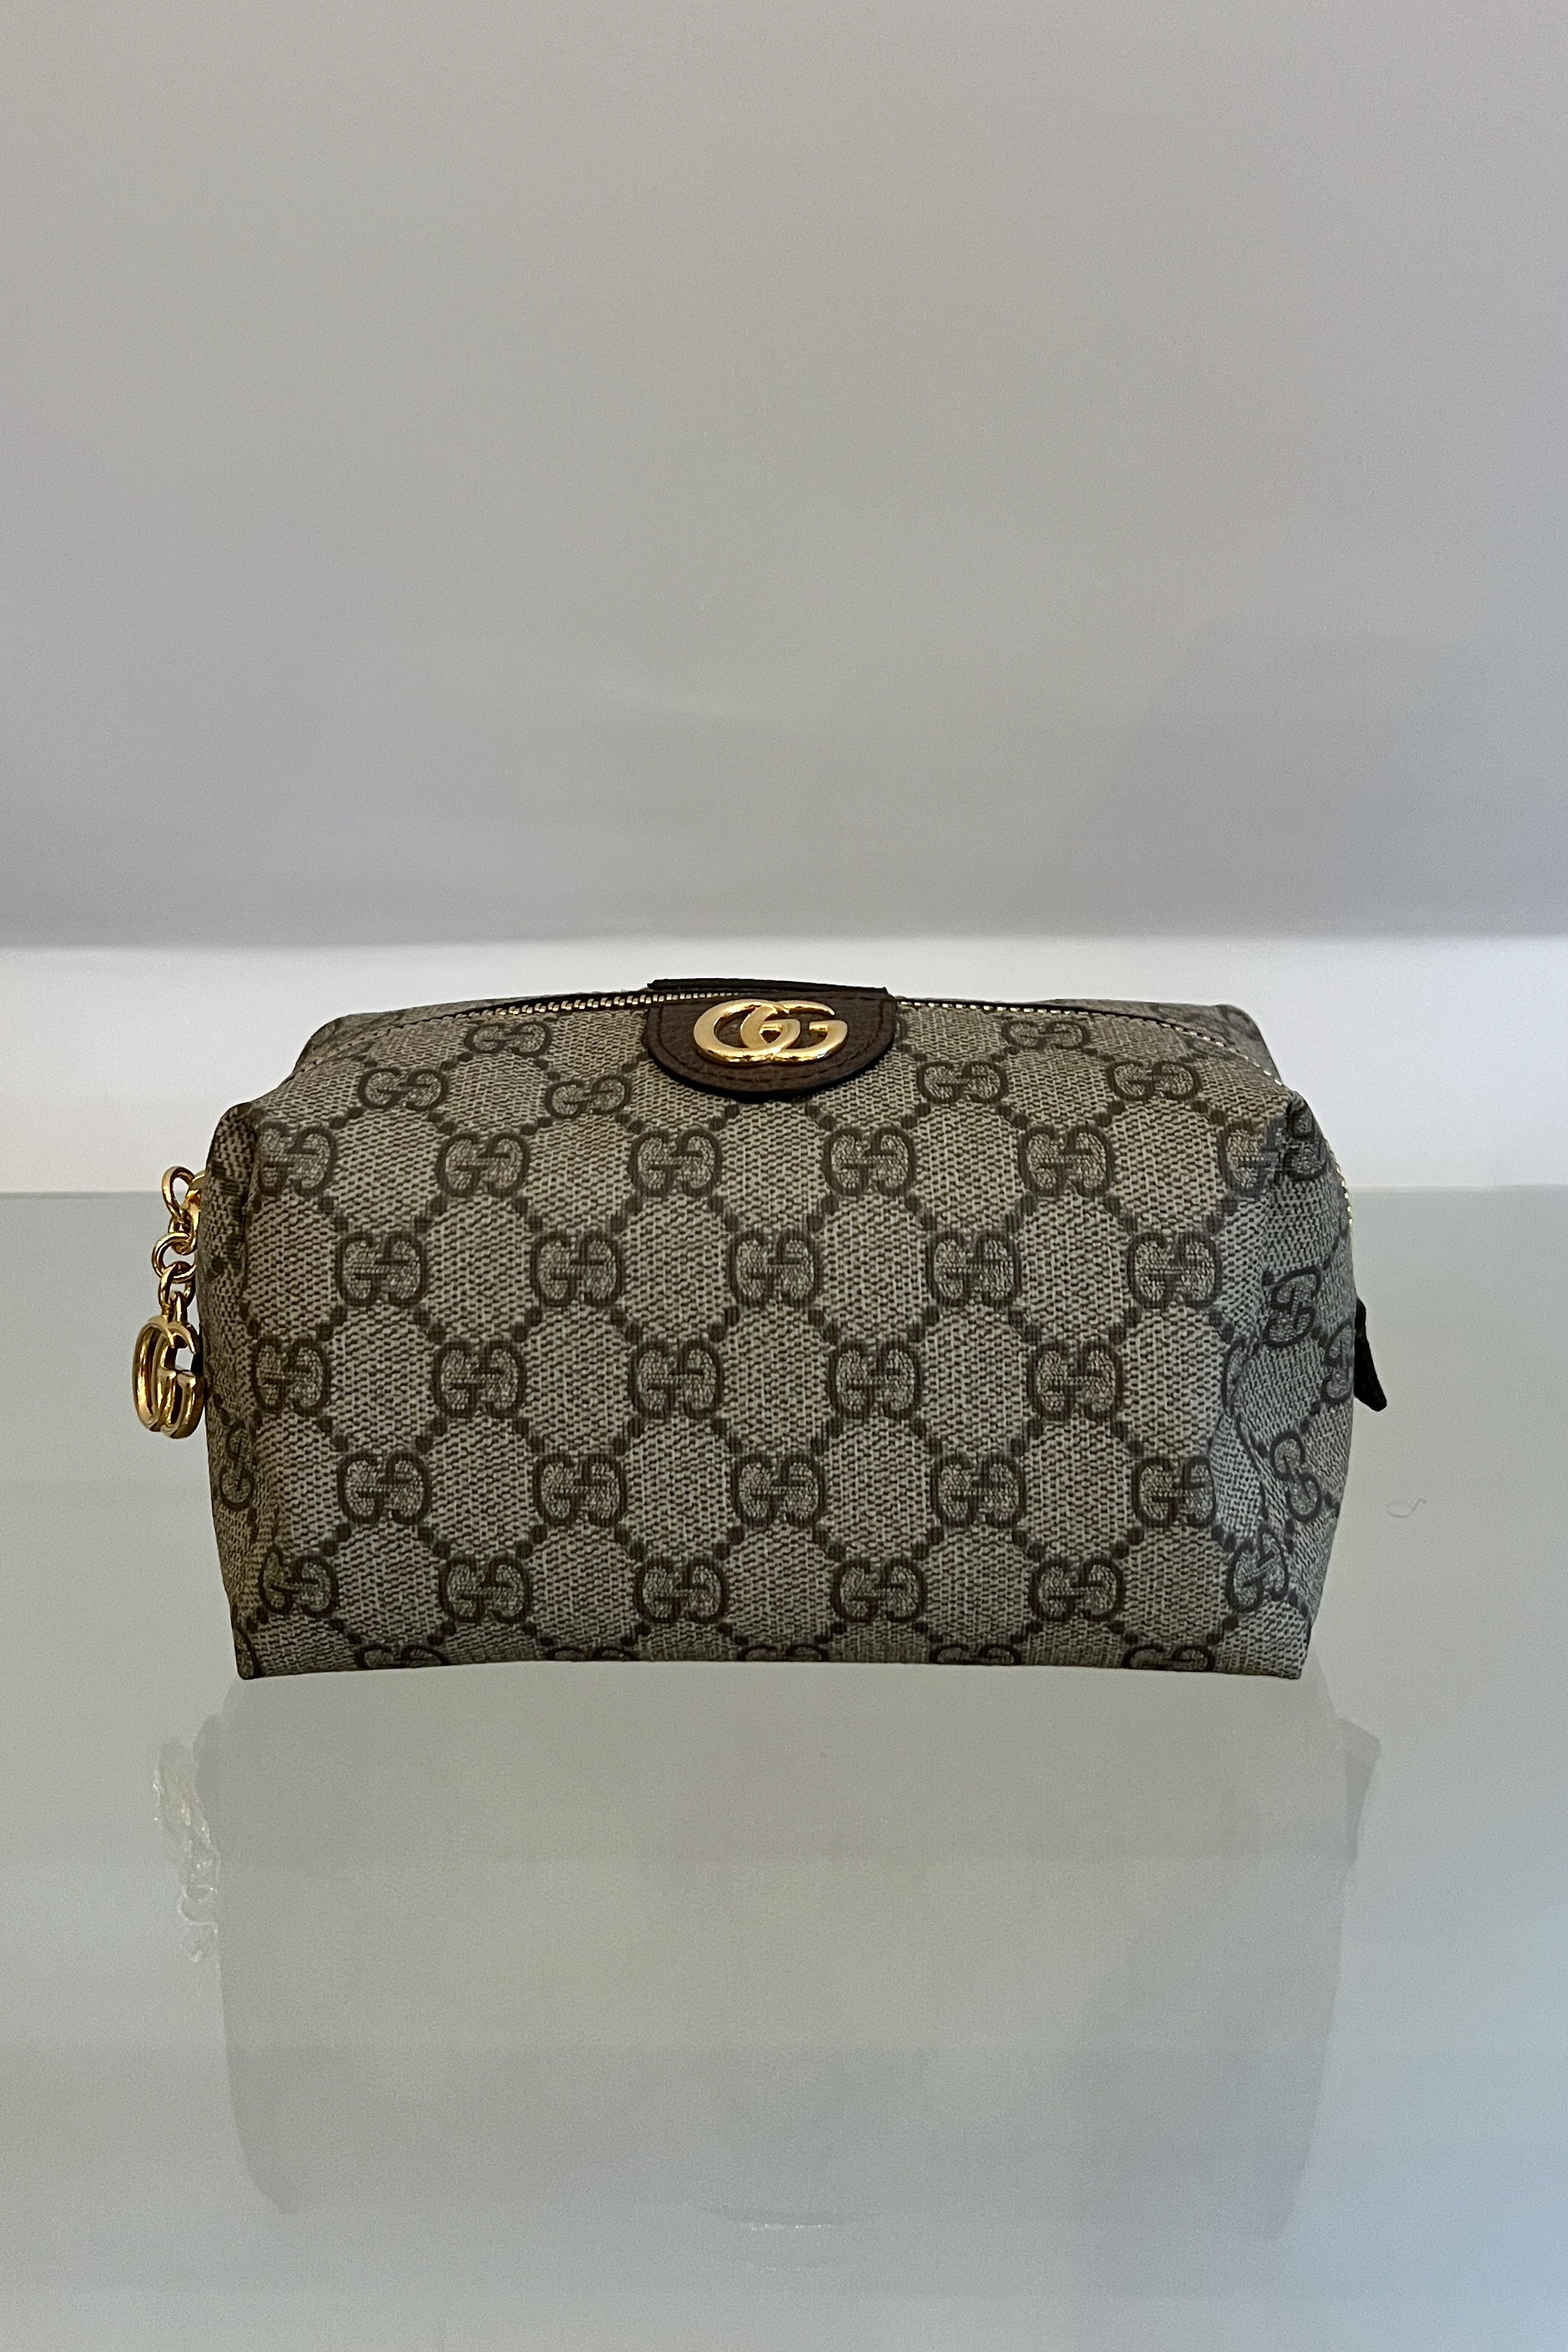 Gucci Ophidia Cosmetic Case